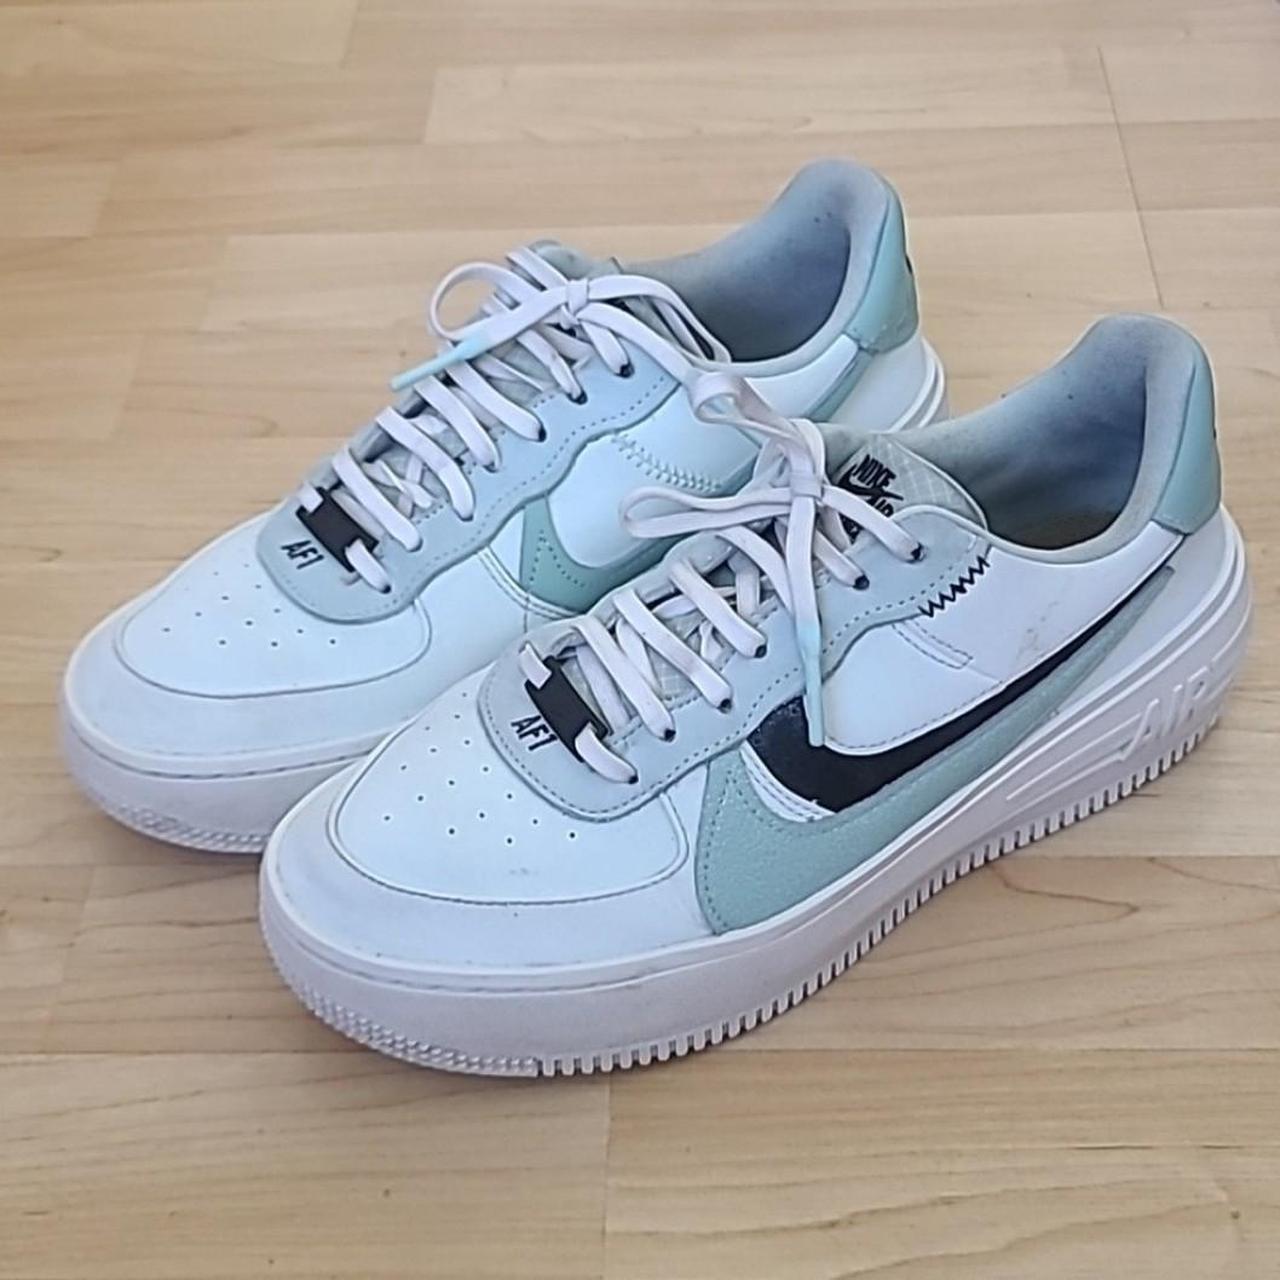 Nike Air Force 1 PLT.AF.ORM Barely Green (Women's) - DX3730-300 - US